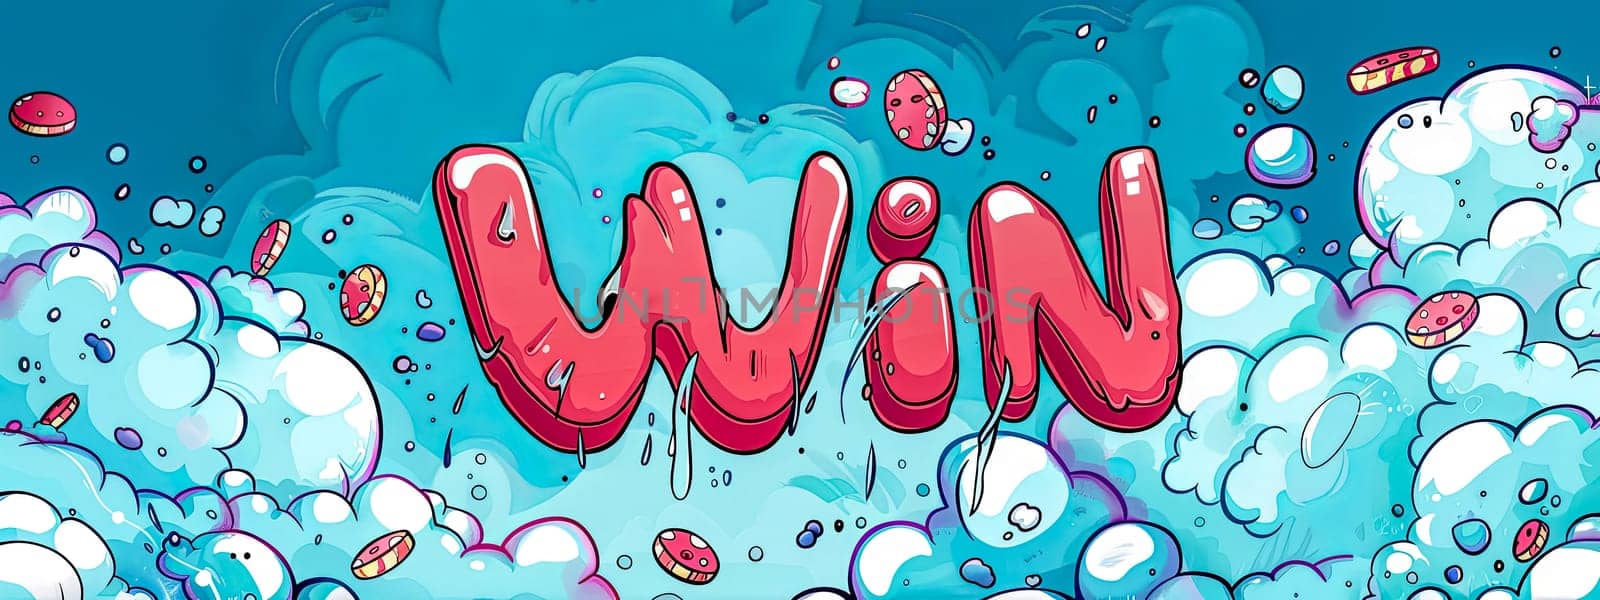 Vibrant and colorful comic style win celebration concept with playful and bold text. Graphics. And illustration. Depicting the excitement and joy of success and achievement in a fun and energetic game